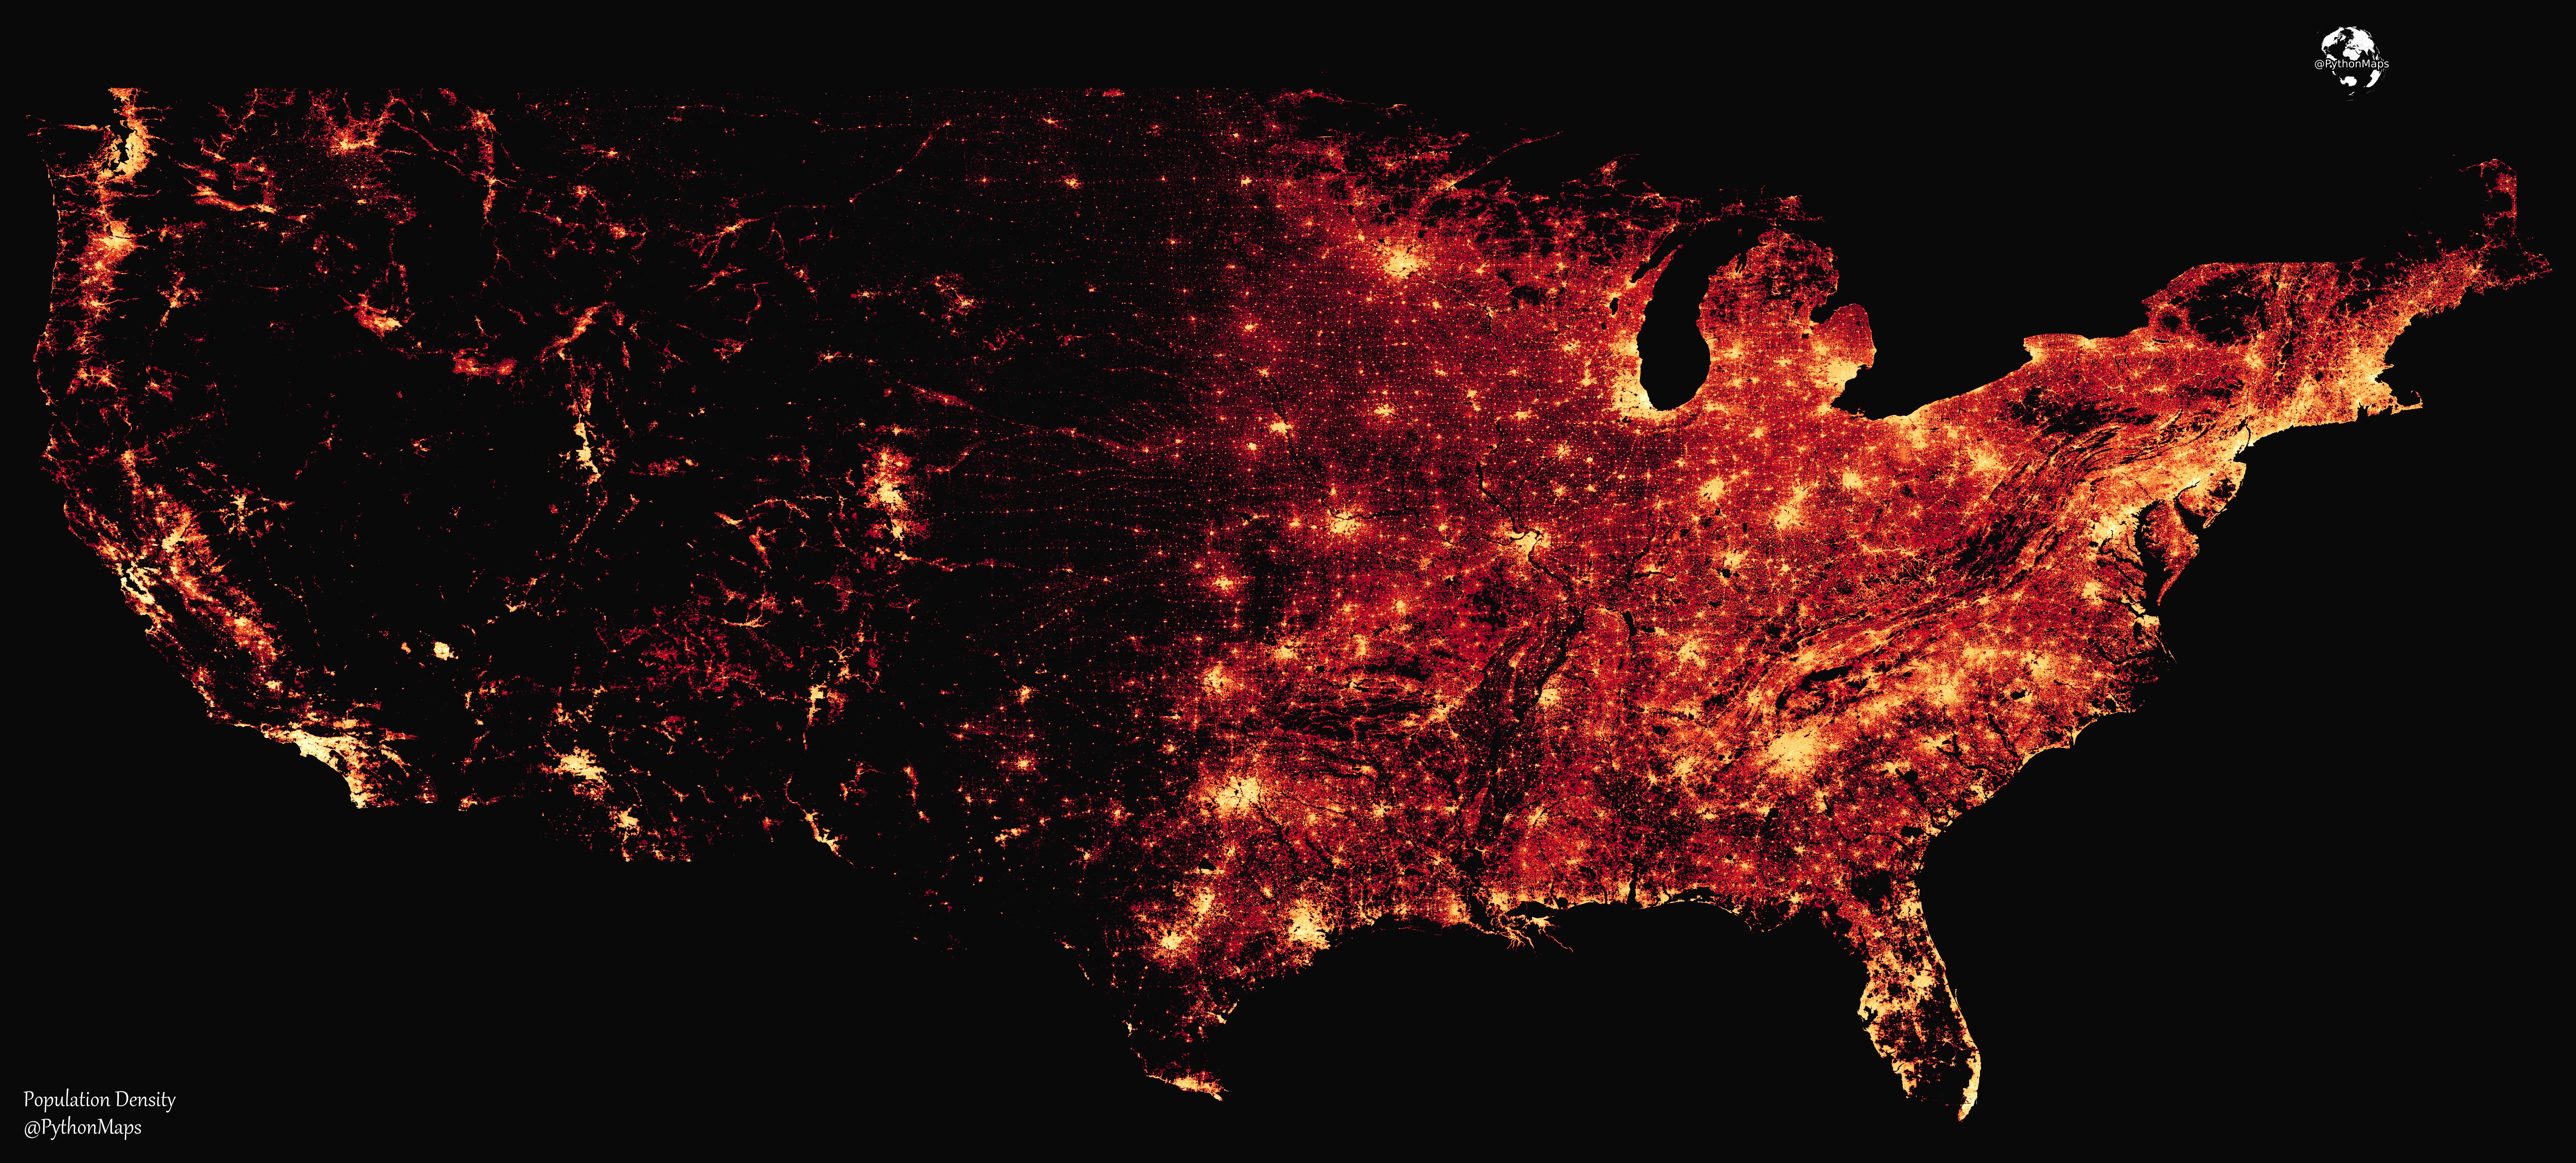 The Population density of the USA